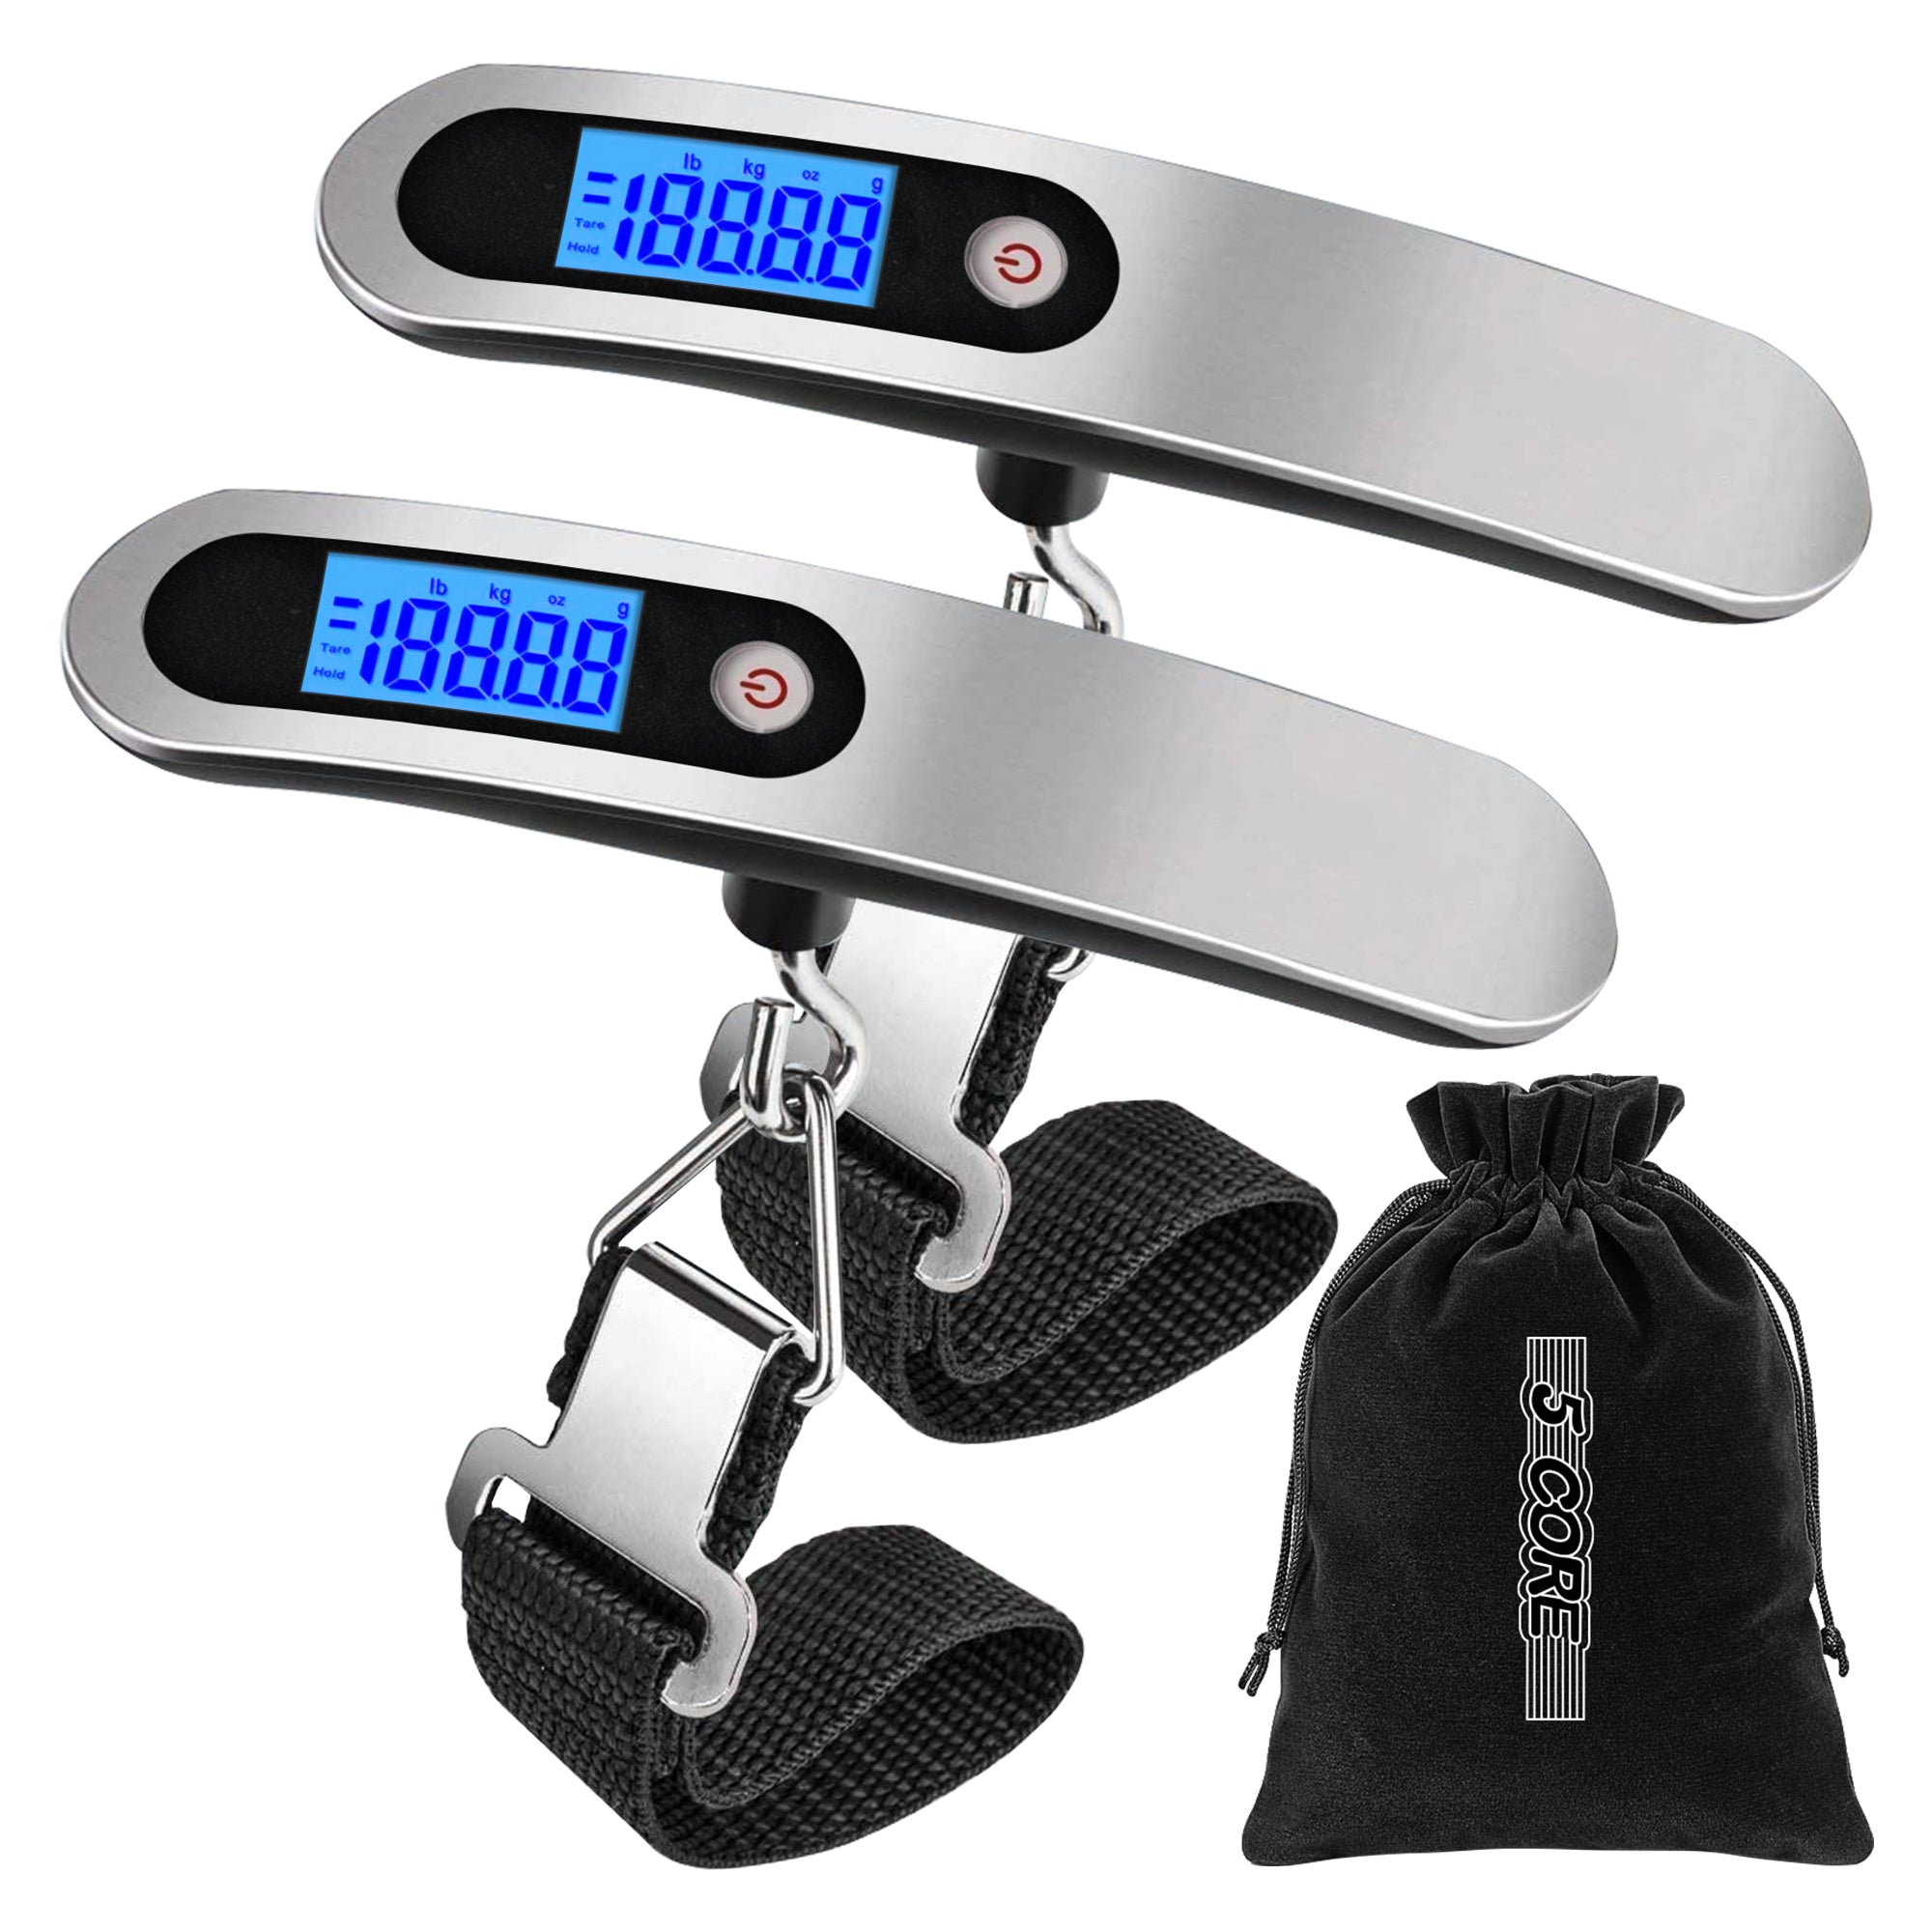 5Core Luggage Scale Tavel Digital 110lbs Capacity Suitcase Scales Hanging Baggage Weighing Machine